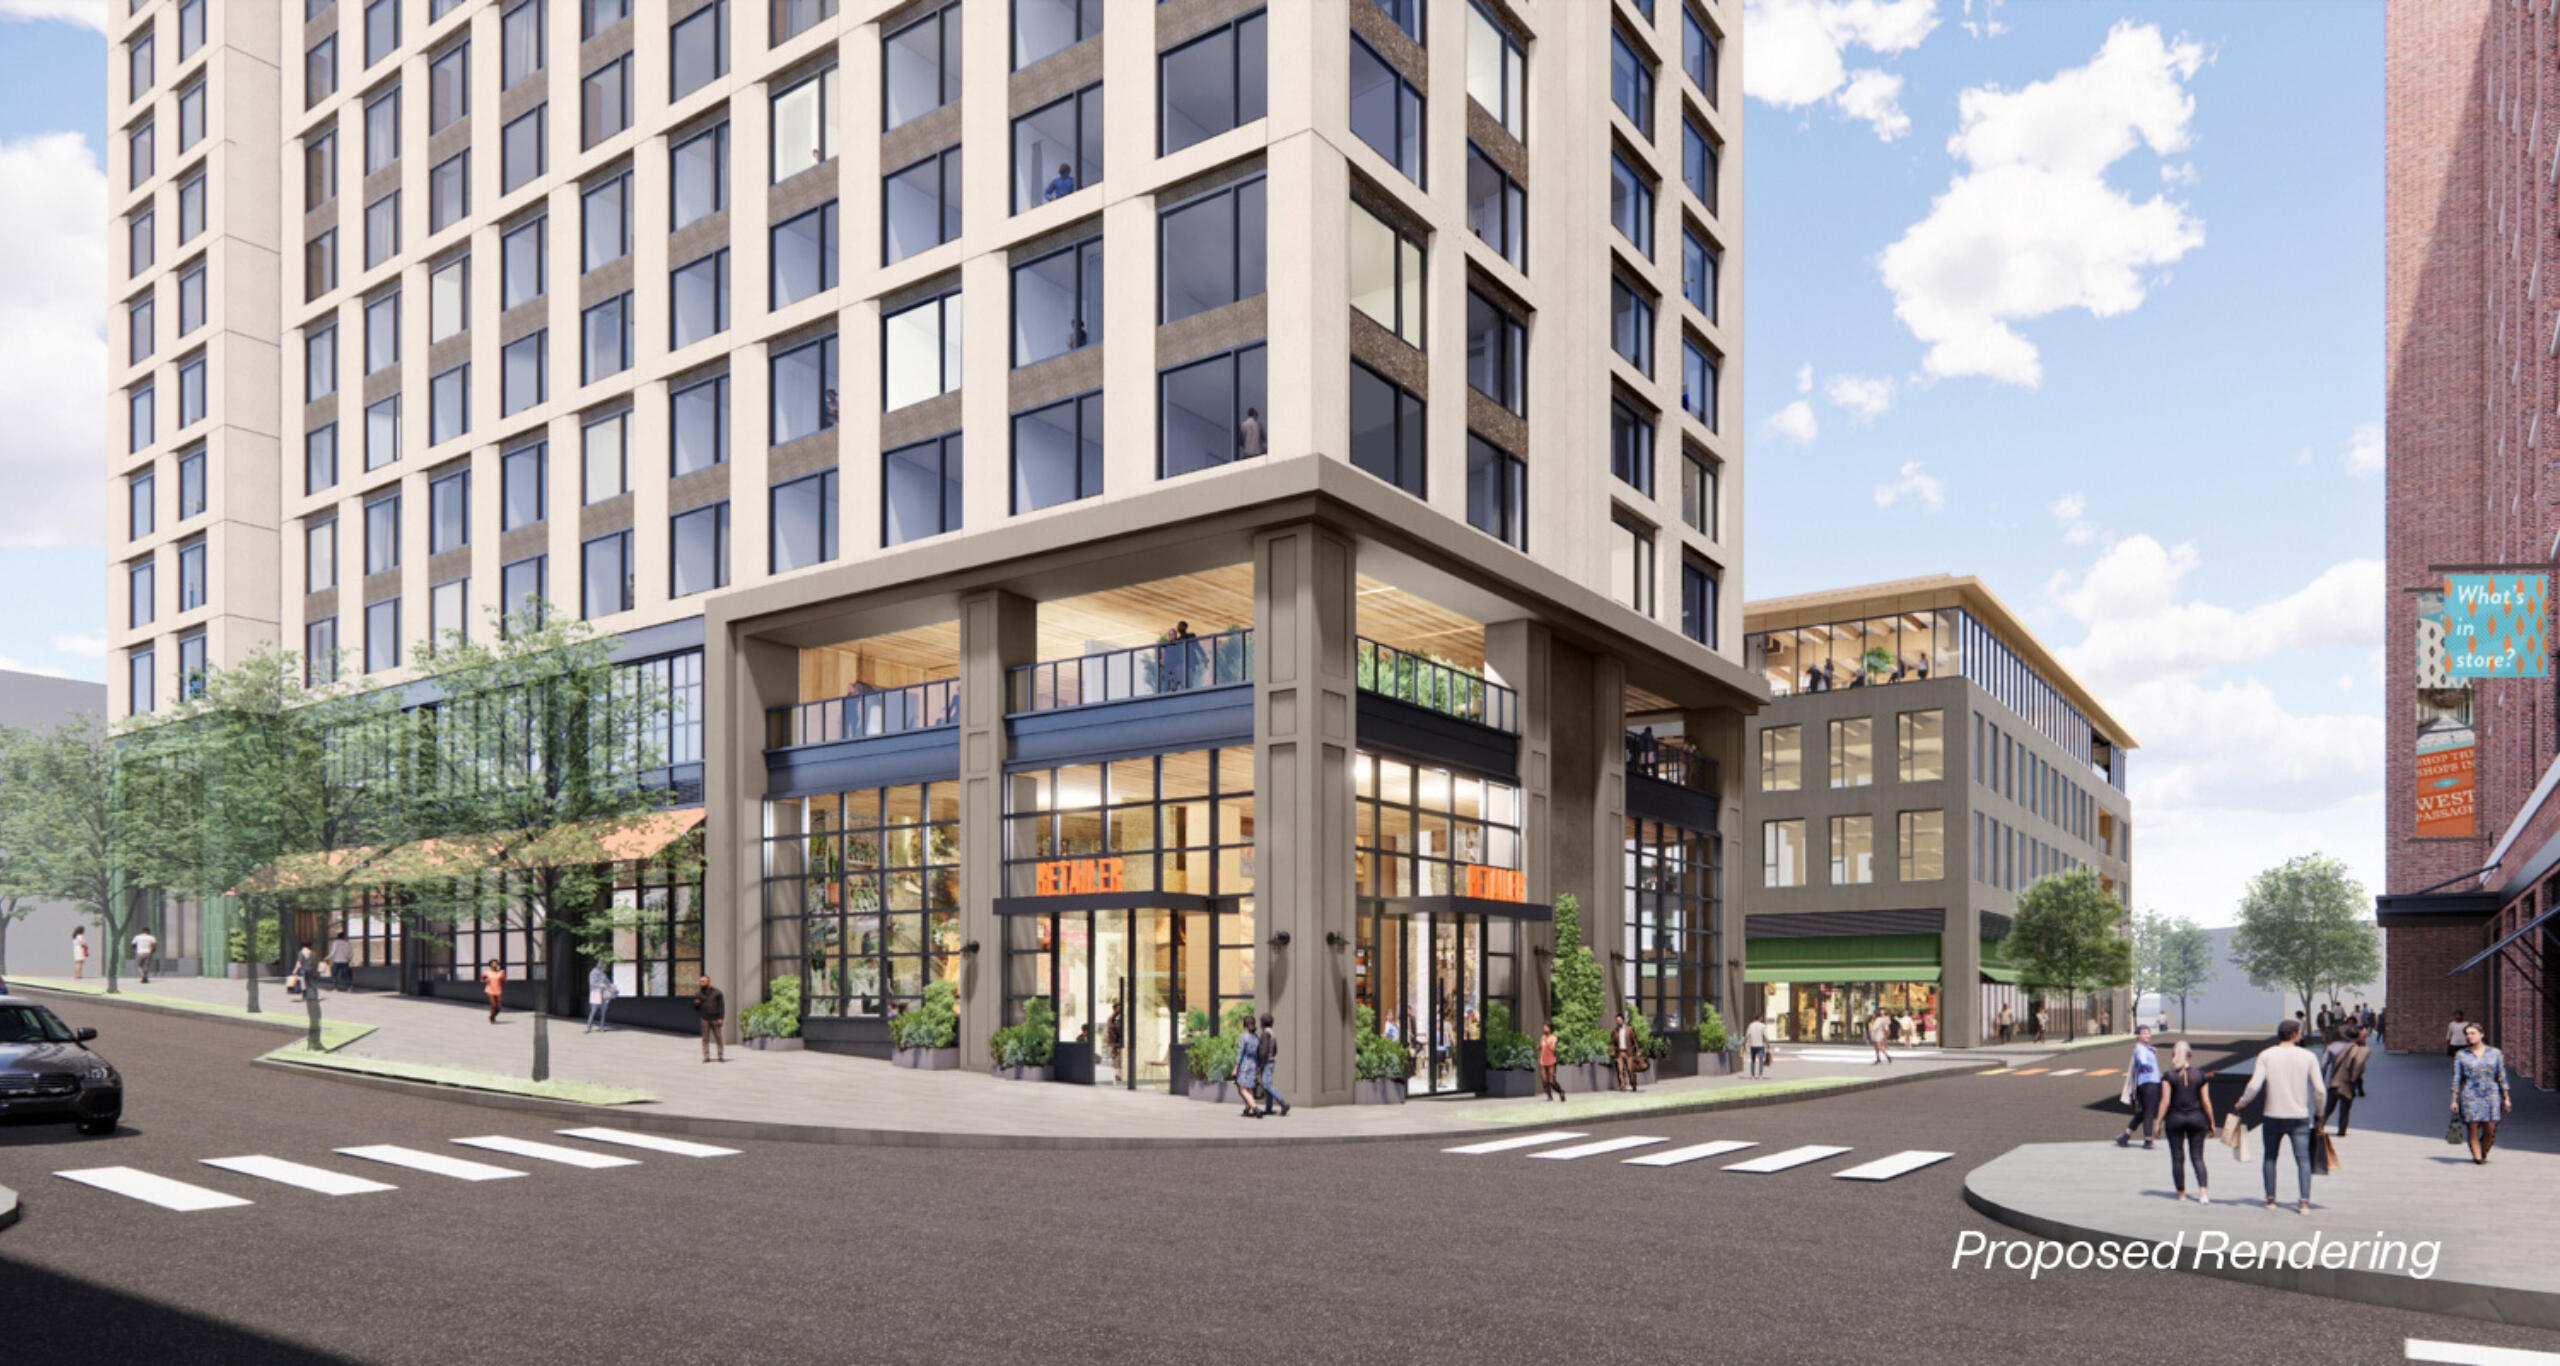 Proposed rendering of the exterior of Ponce City Market's phase 2 building facades